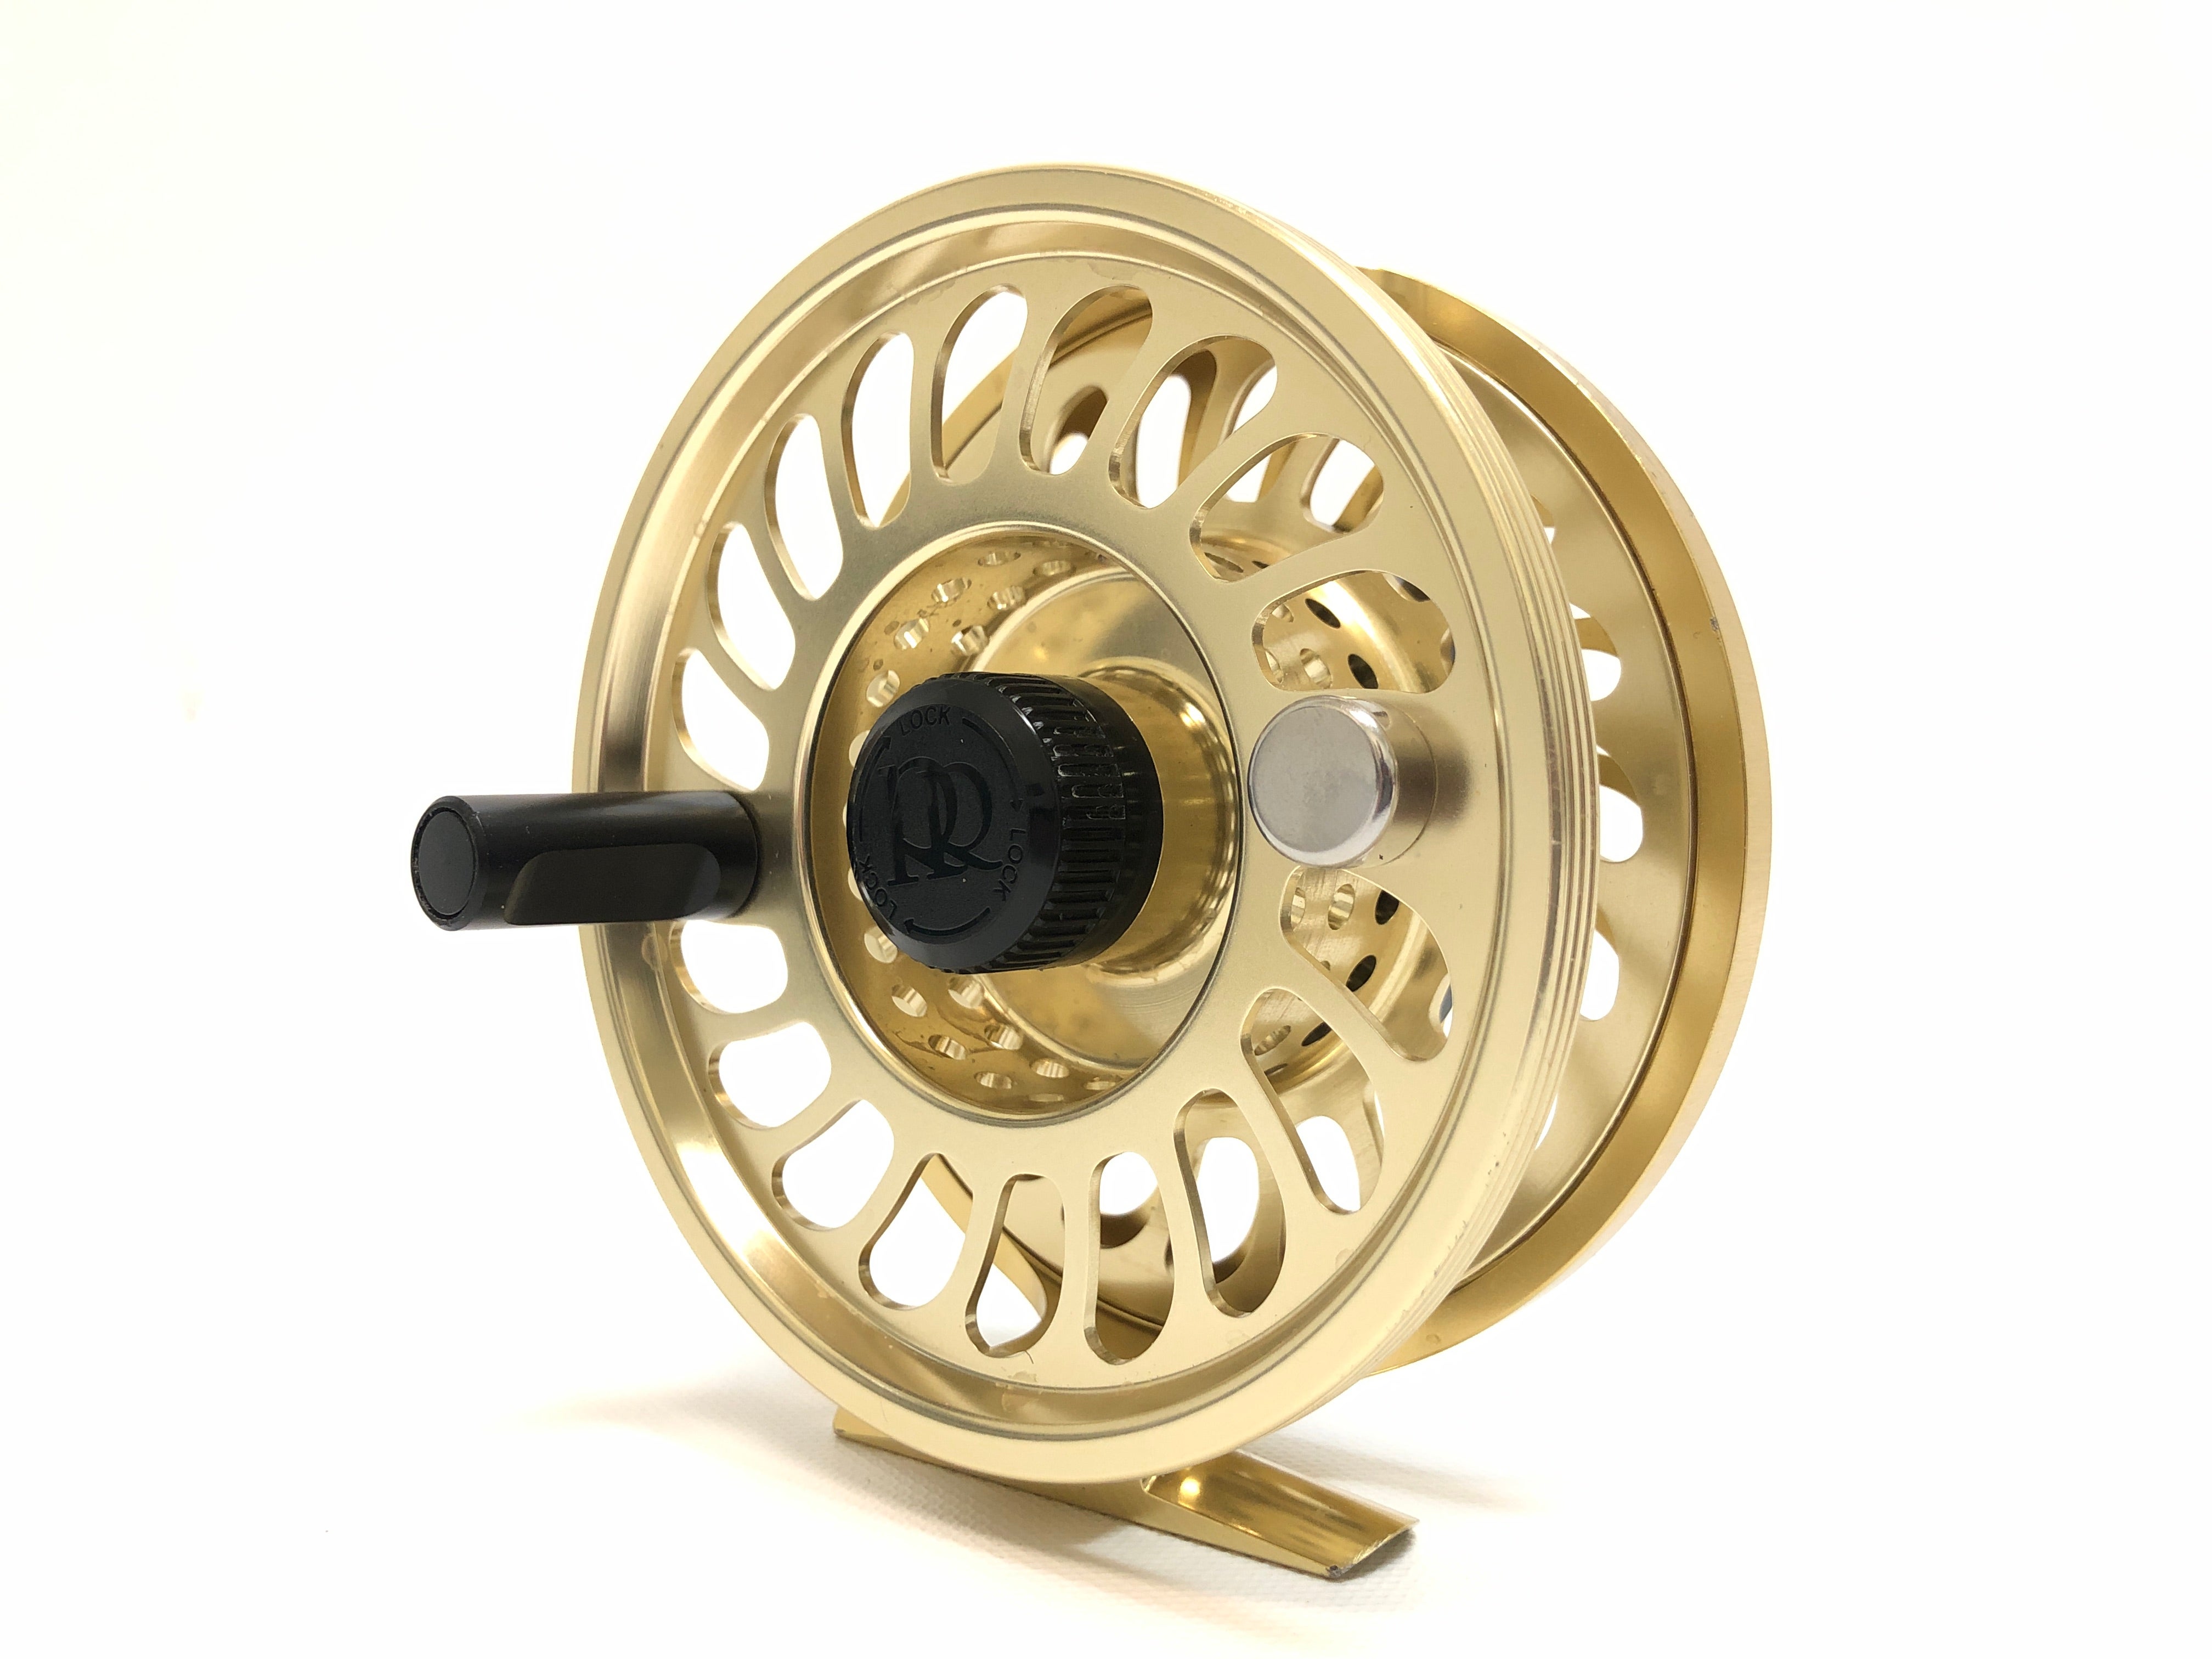 ROSS CANYON FLY REEL BG6 WITH SPARE SPOOL 海外 即決 - スキル、知識